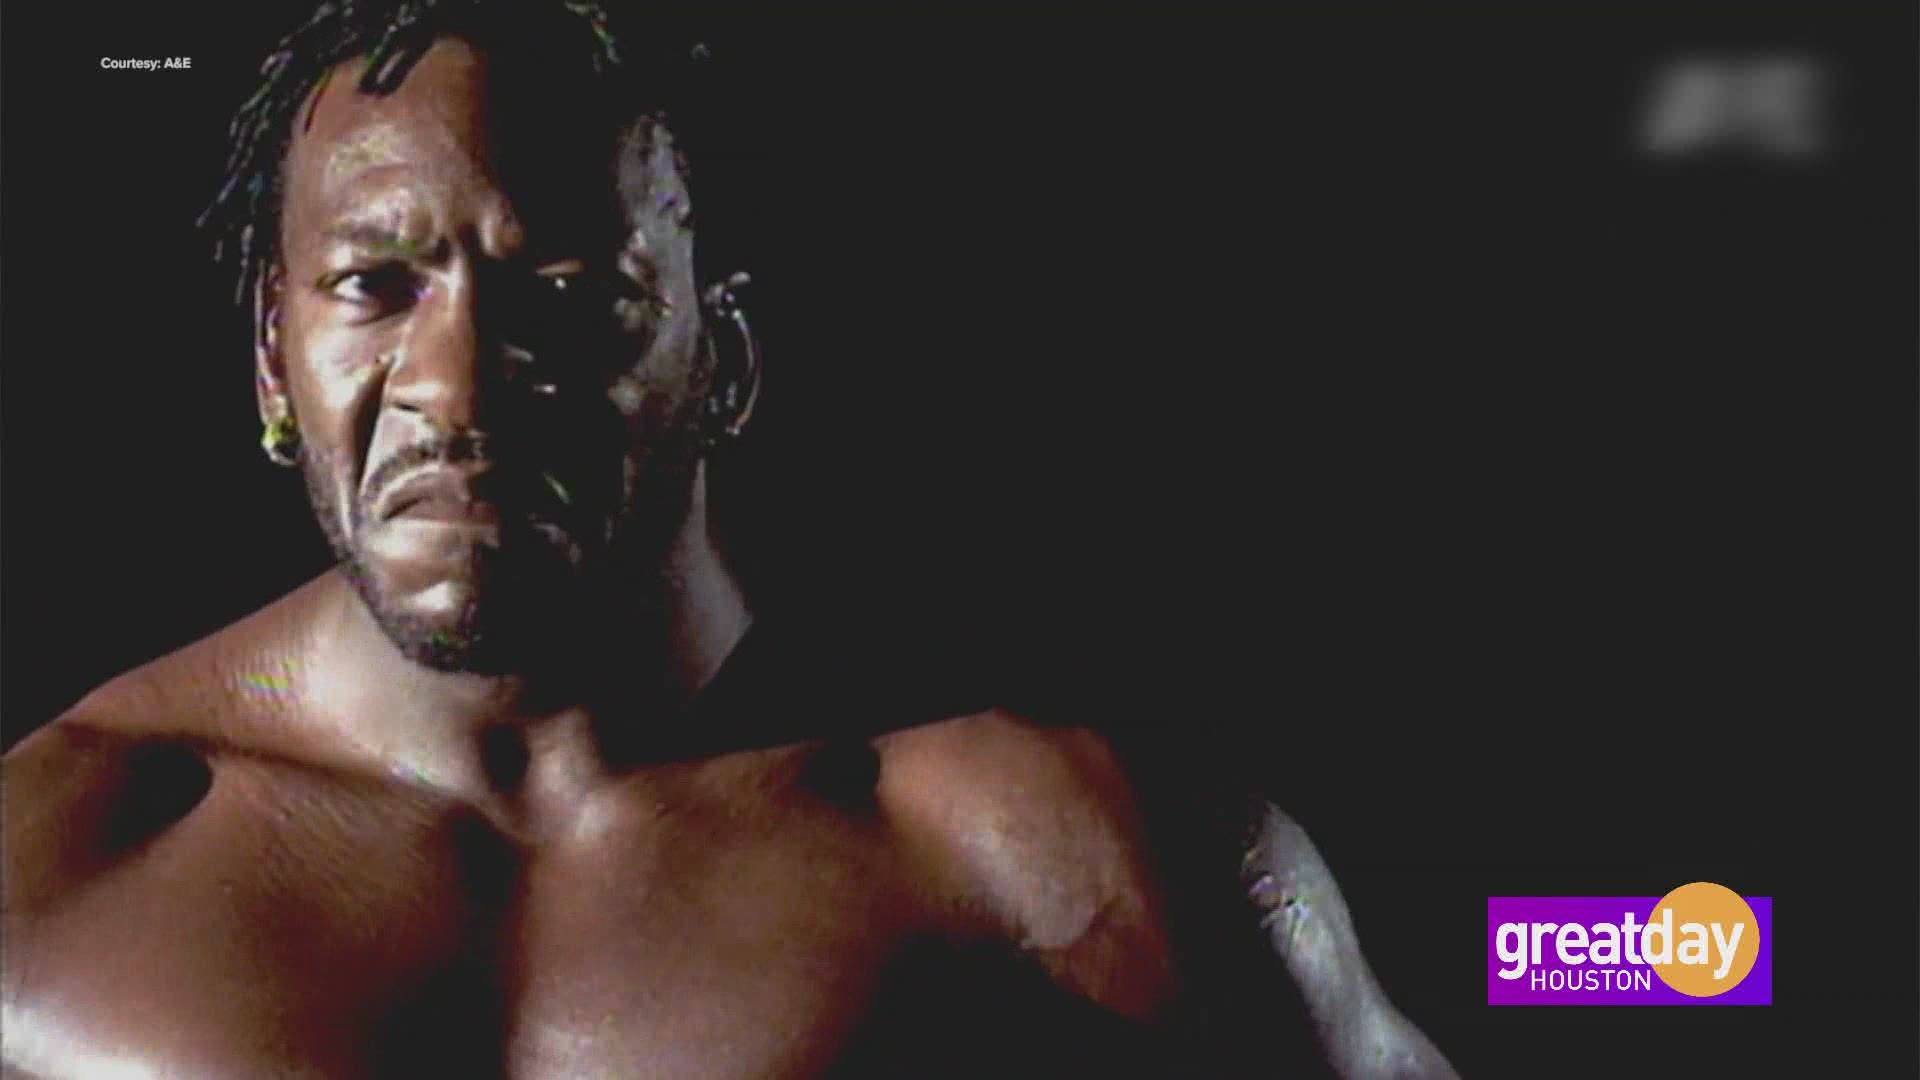 6x World Champion Booker T is the focus of this week's intimate A&E biography